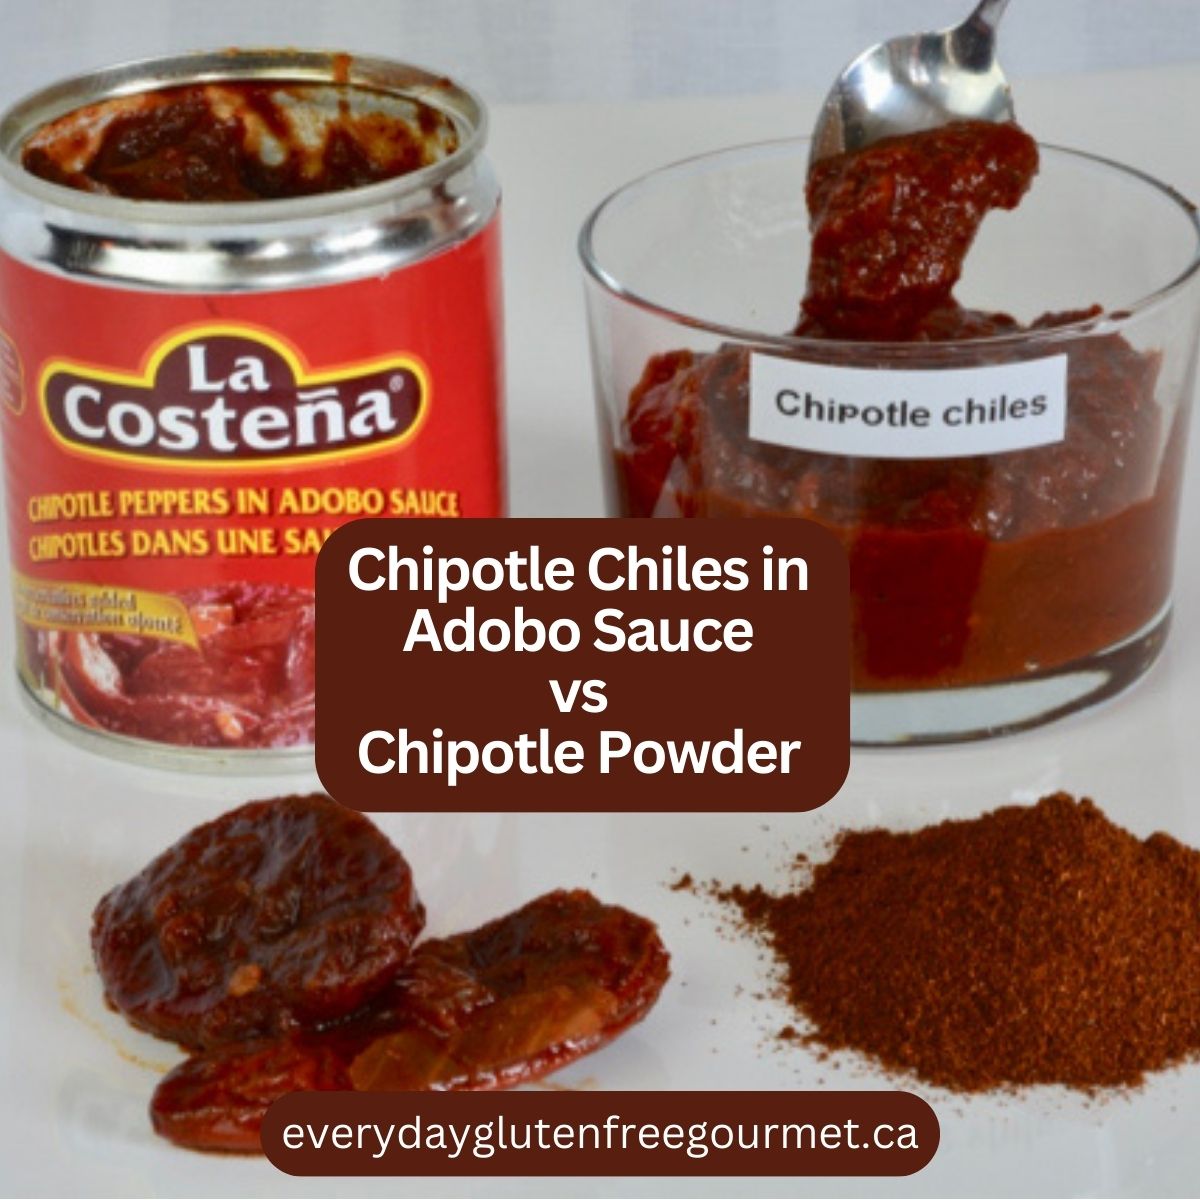 A small tin of gluten free Chipotle Chiles in Adobo Sauce with some removed into a dish, all beside a pile of Chipotle Powder.